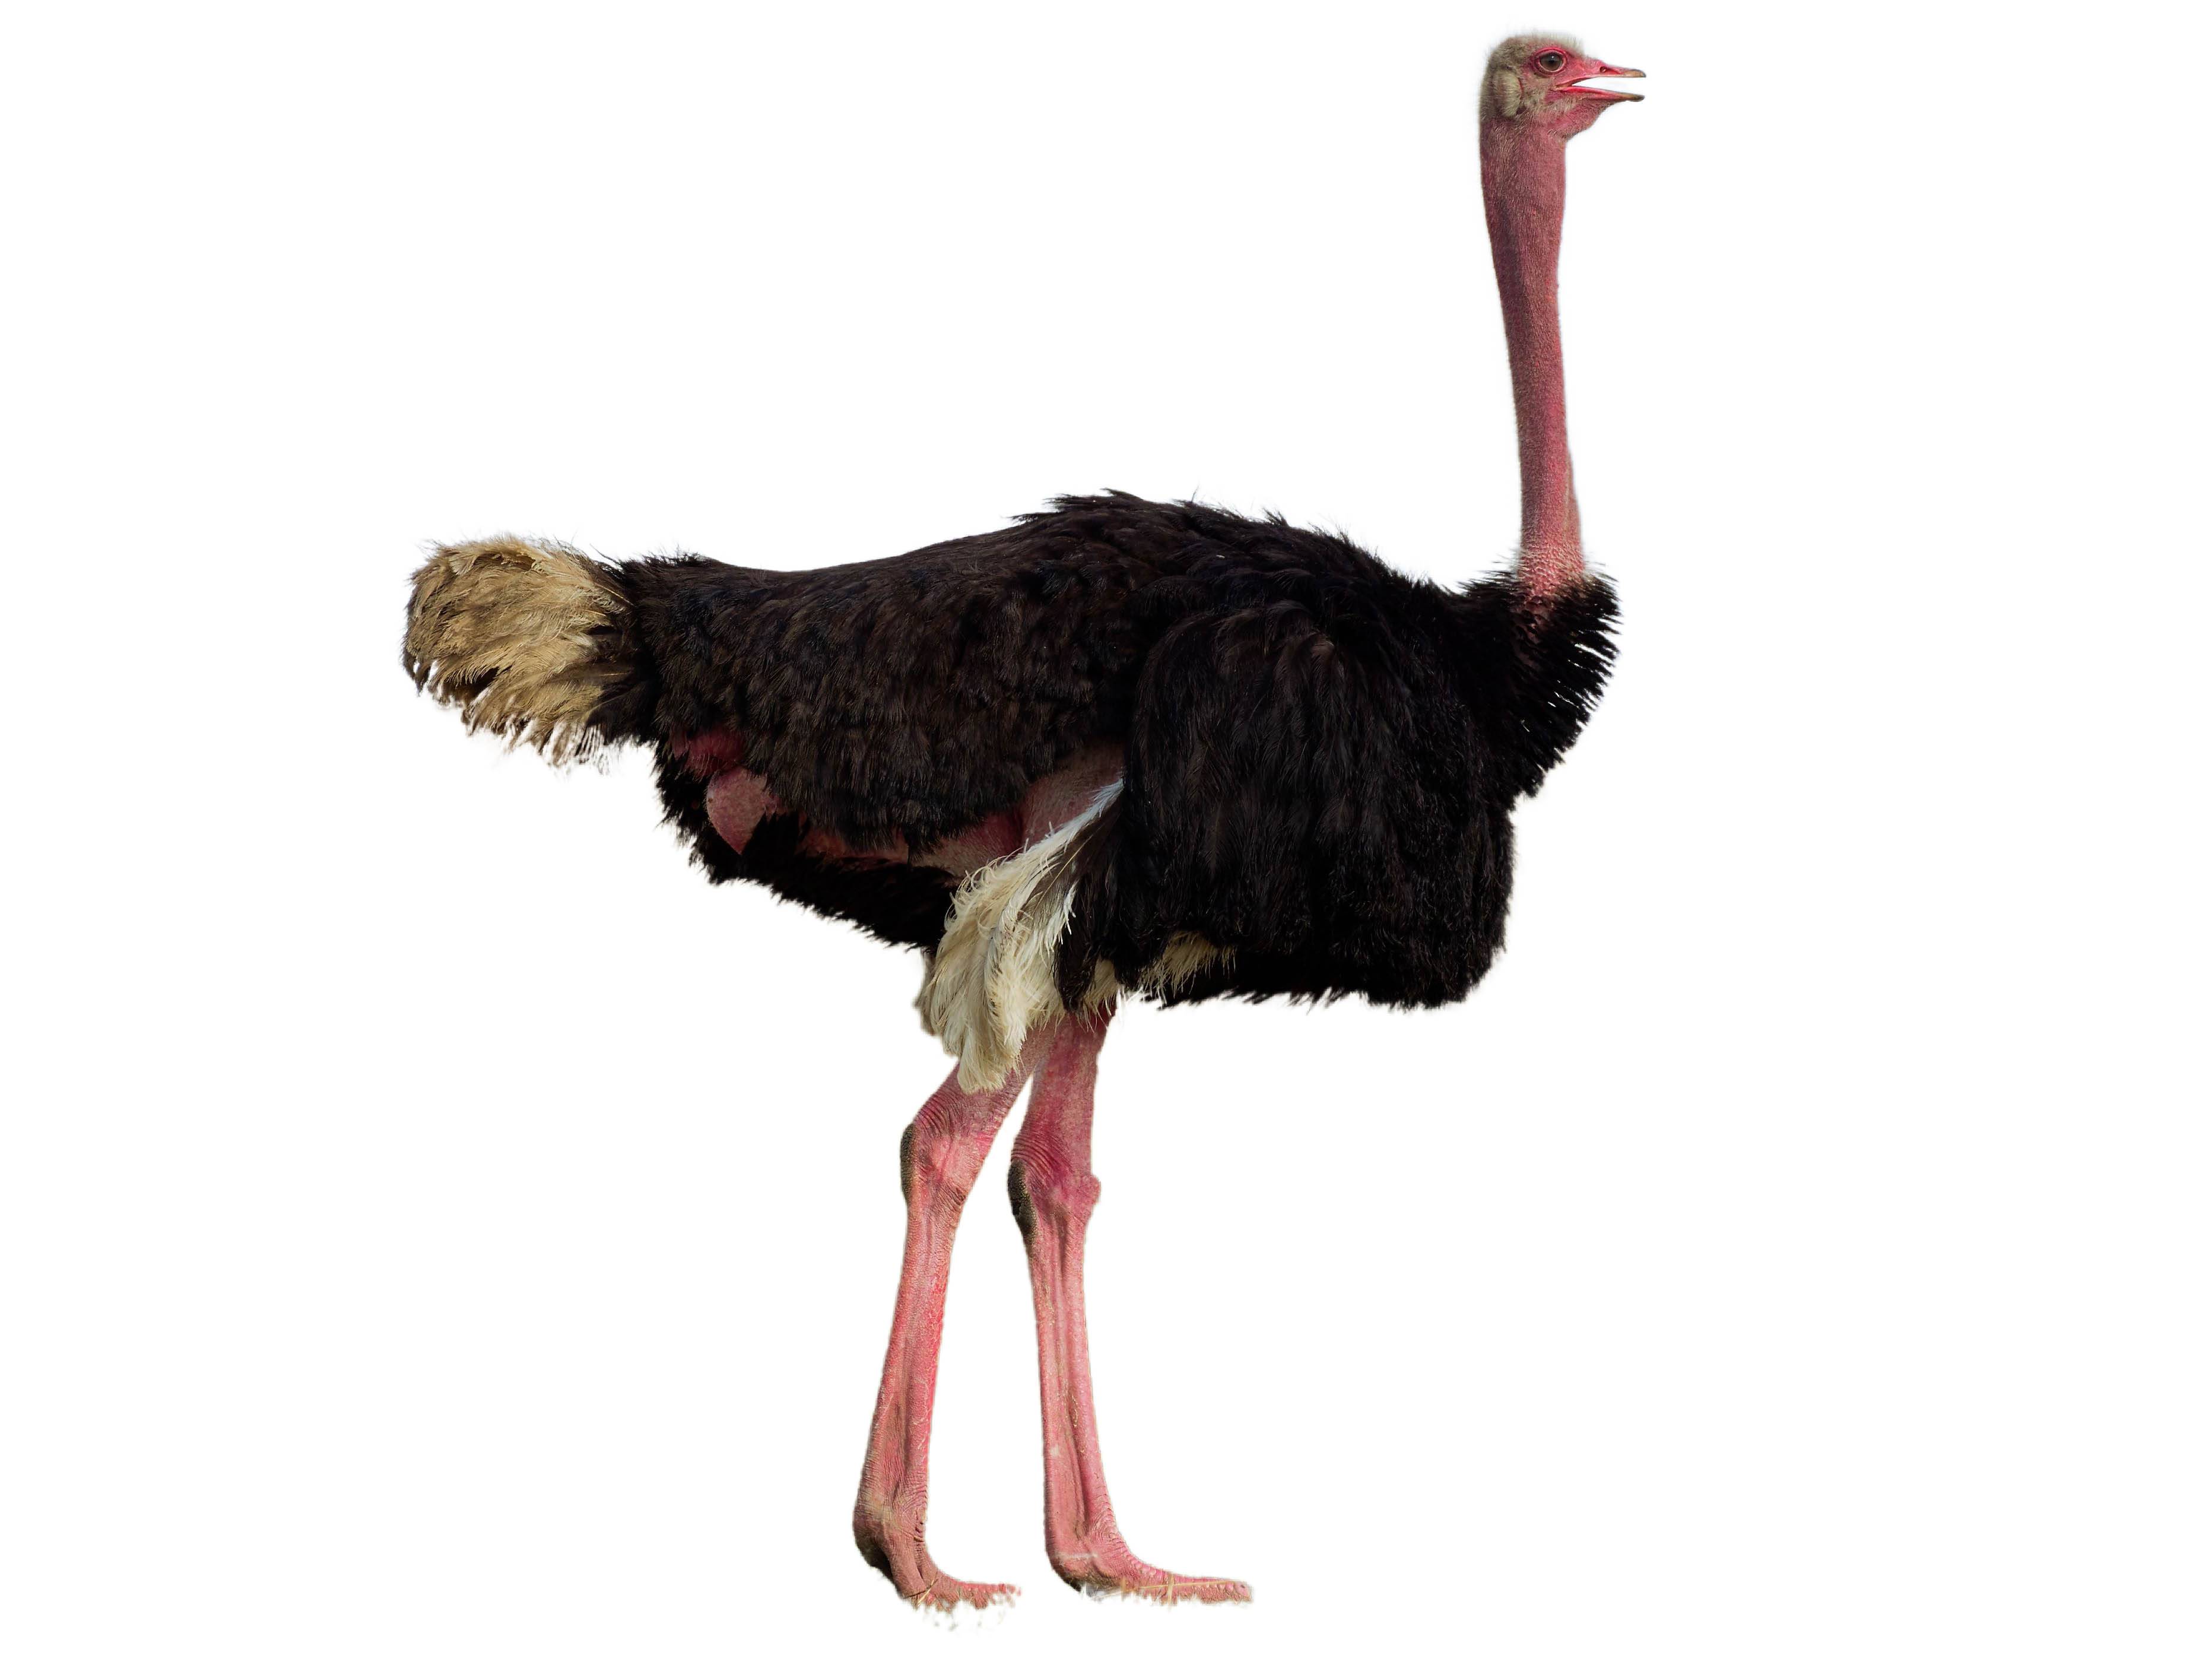 A photo of a Common Ostrich (Struthio camelus), male